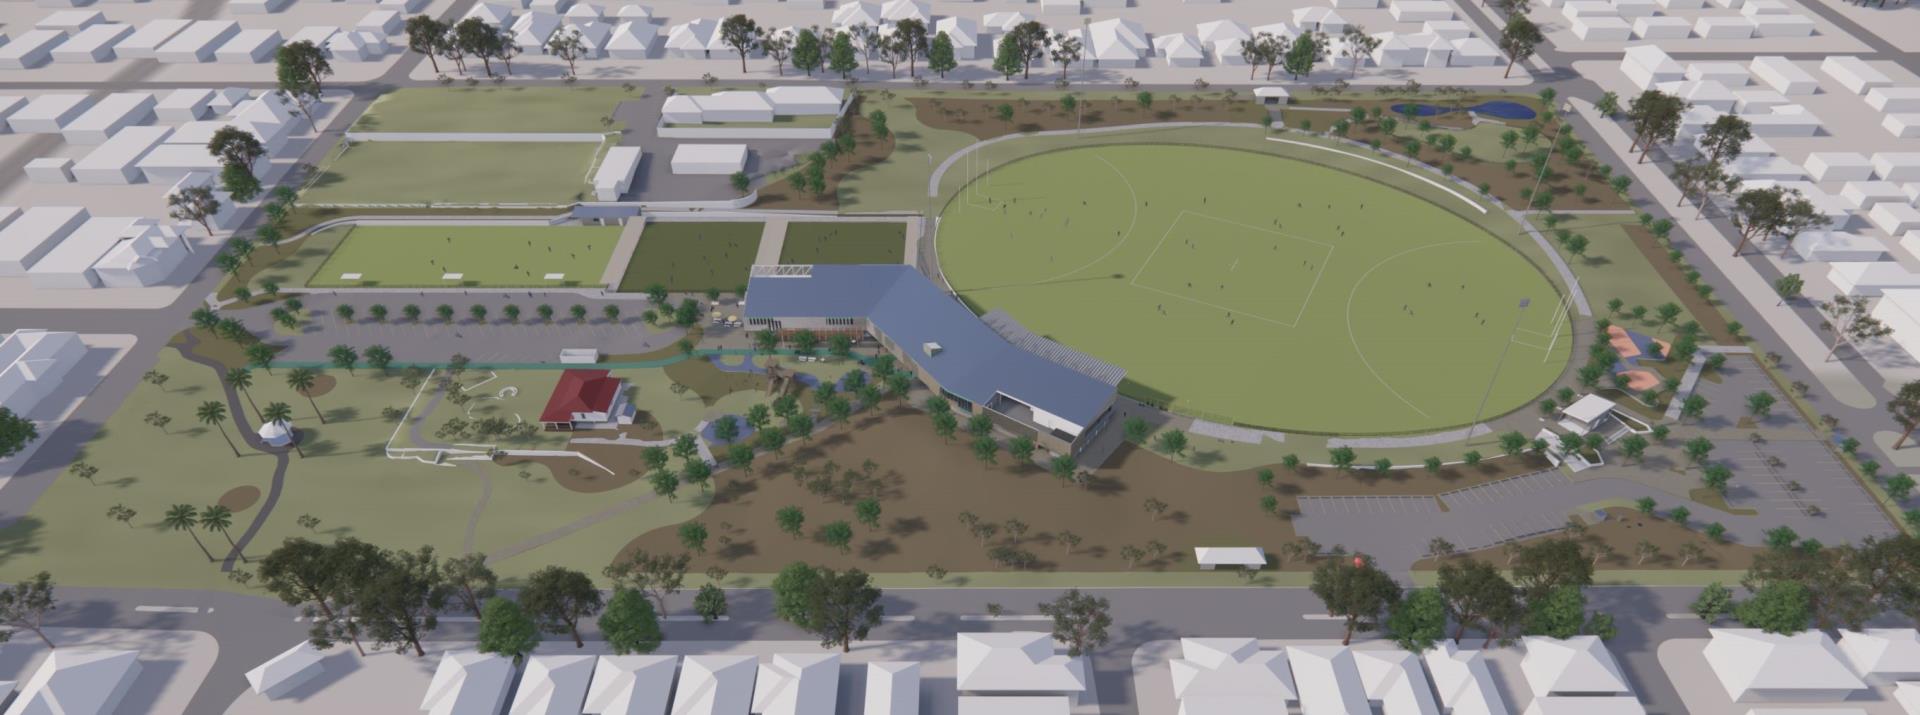 Latest Oval Precinct Redevelopment Update Out Now!